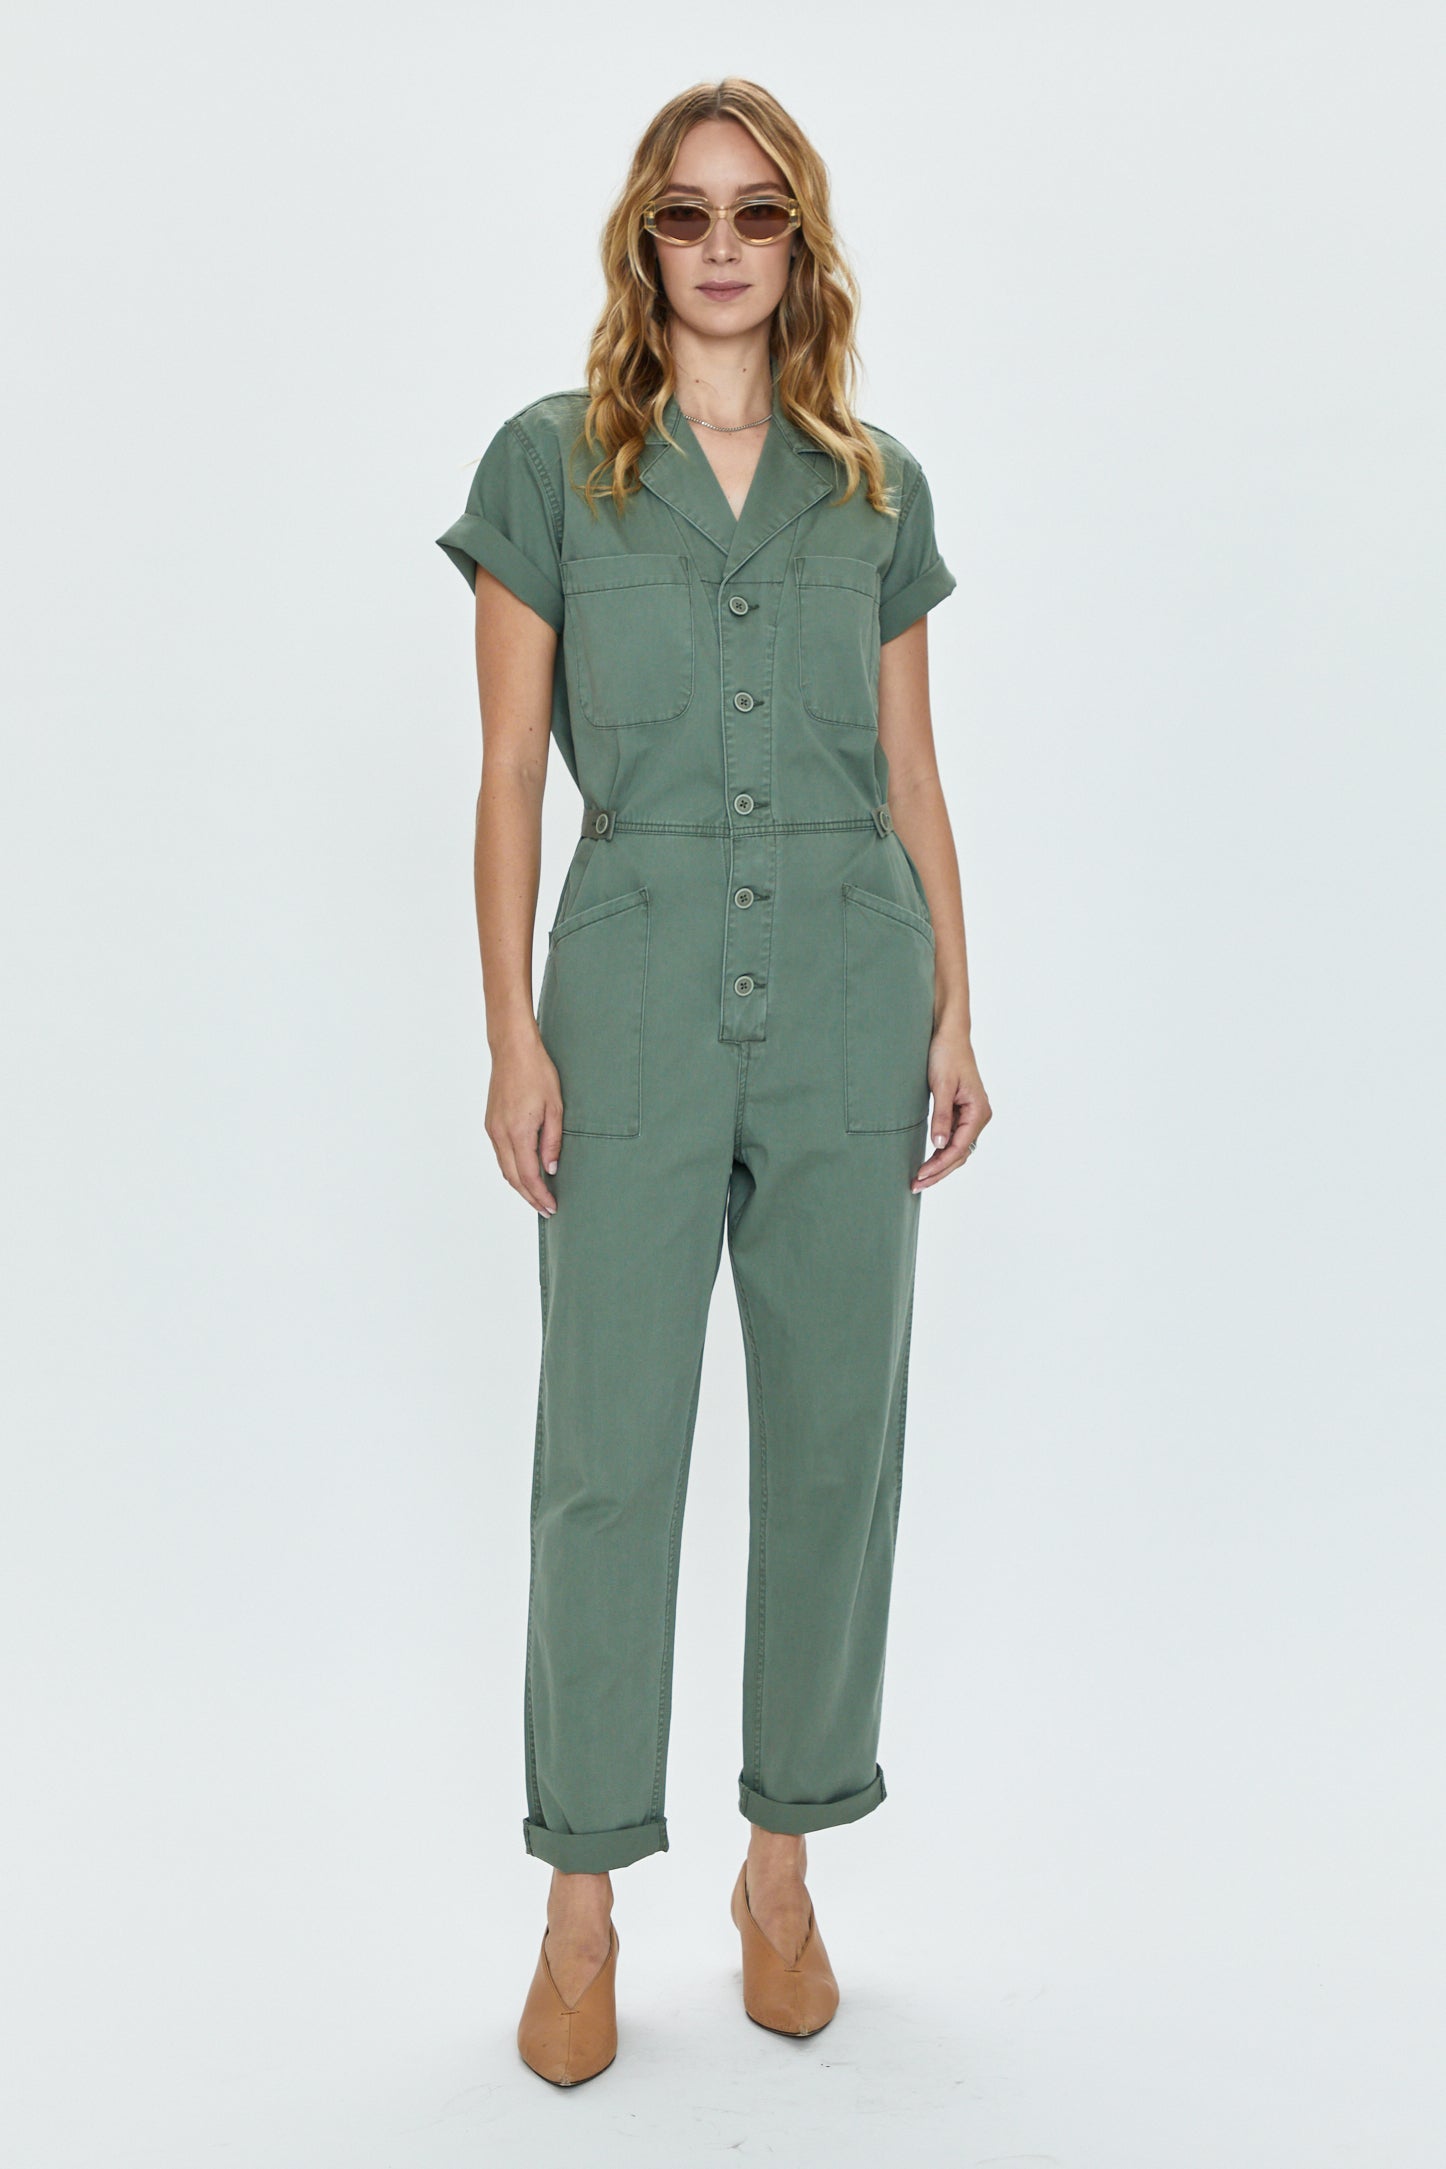 Grover Short Sleeve Field Suit - Colonel